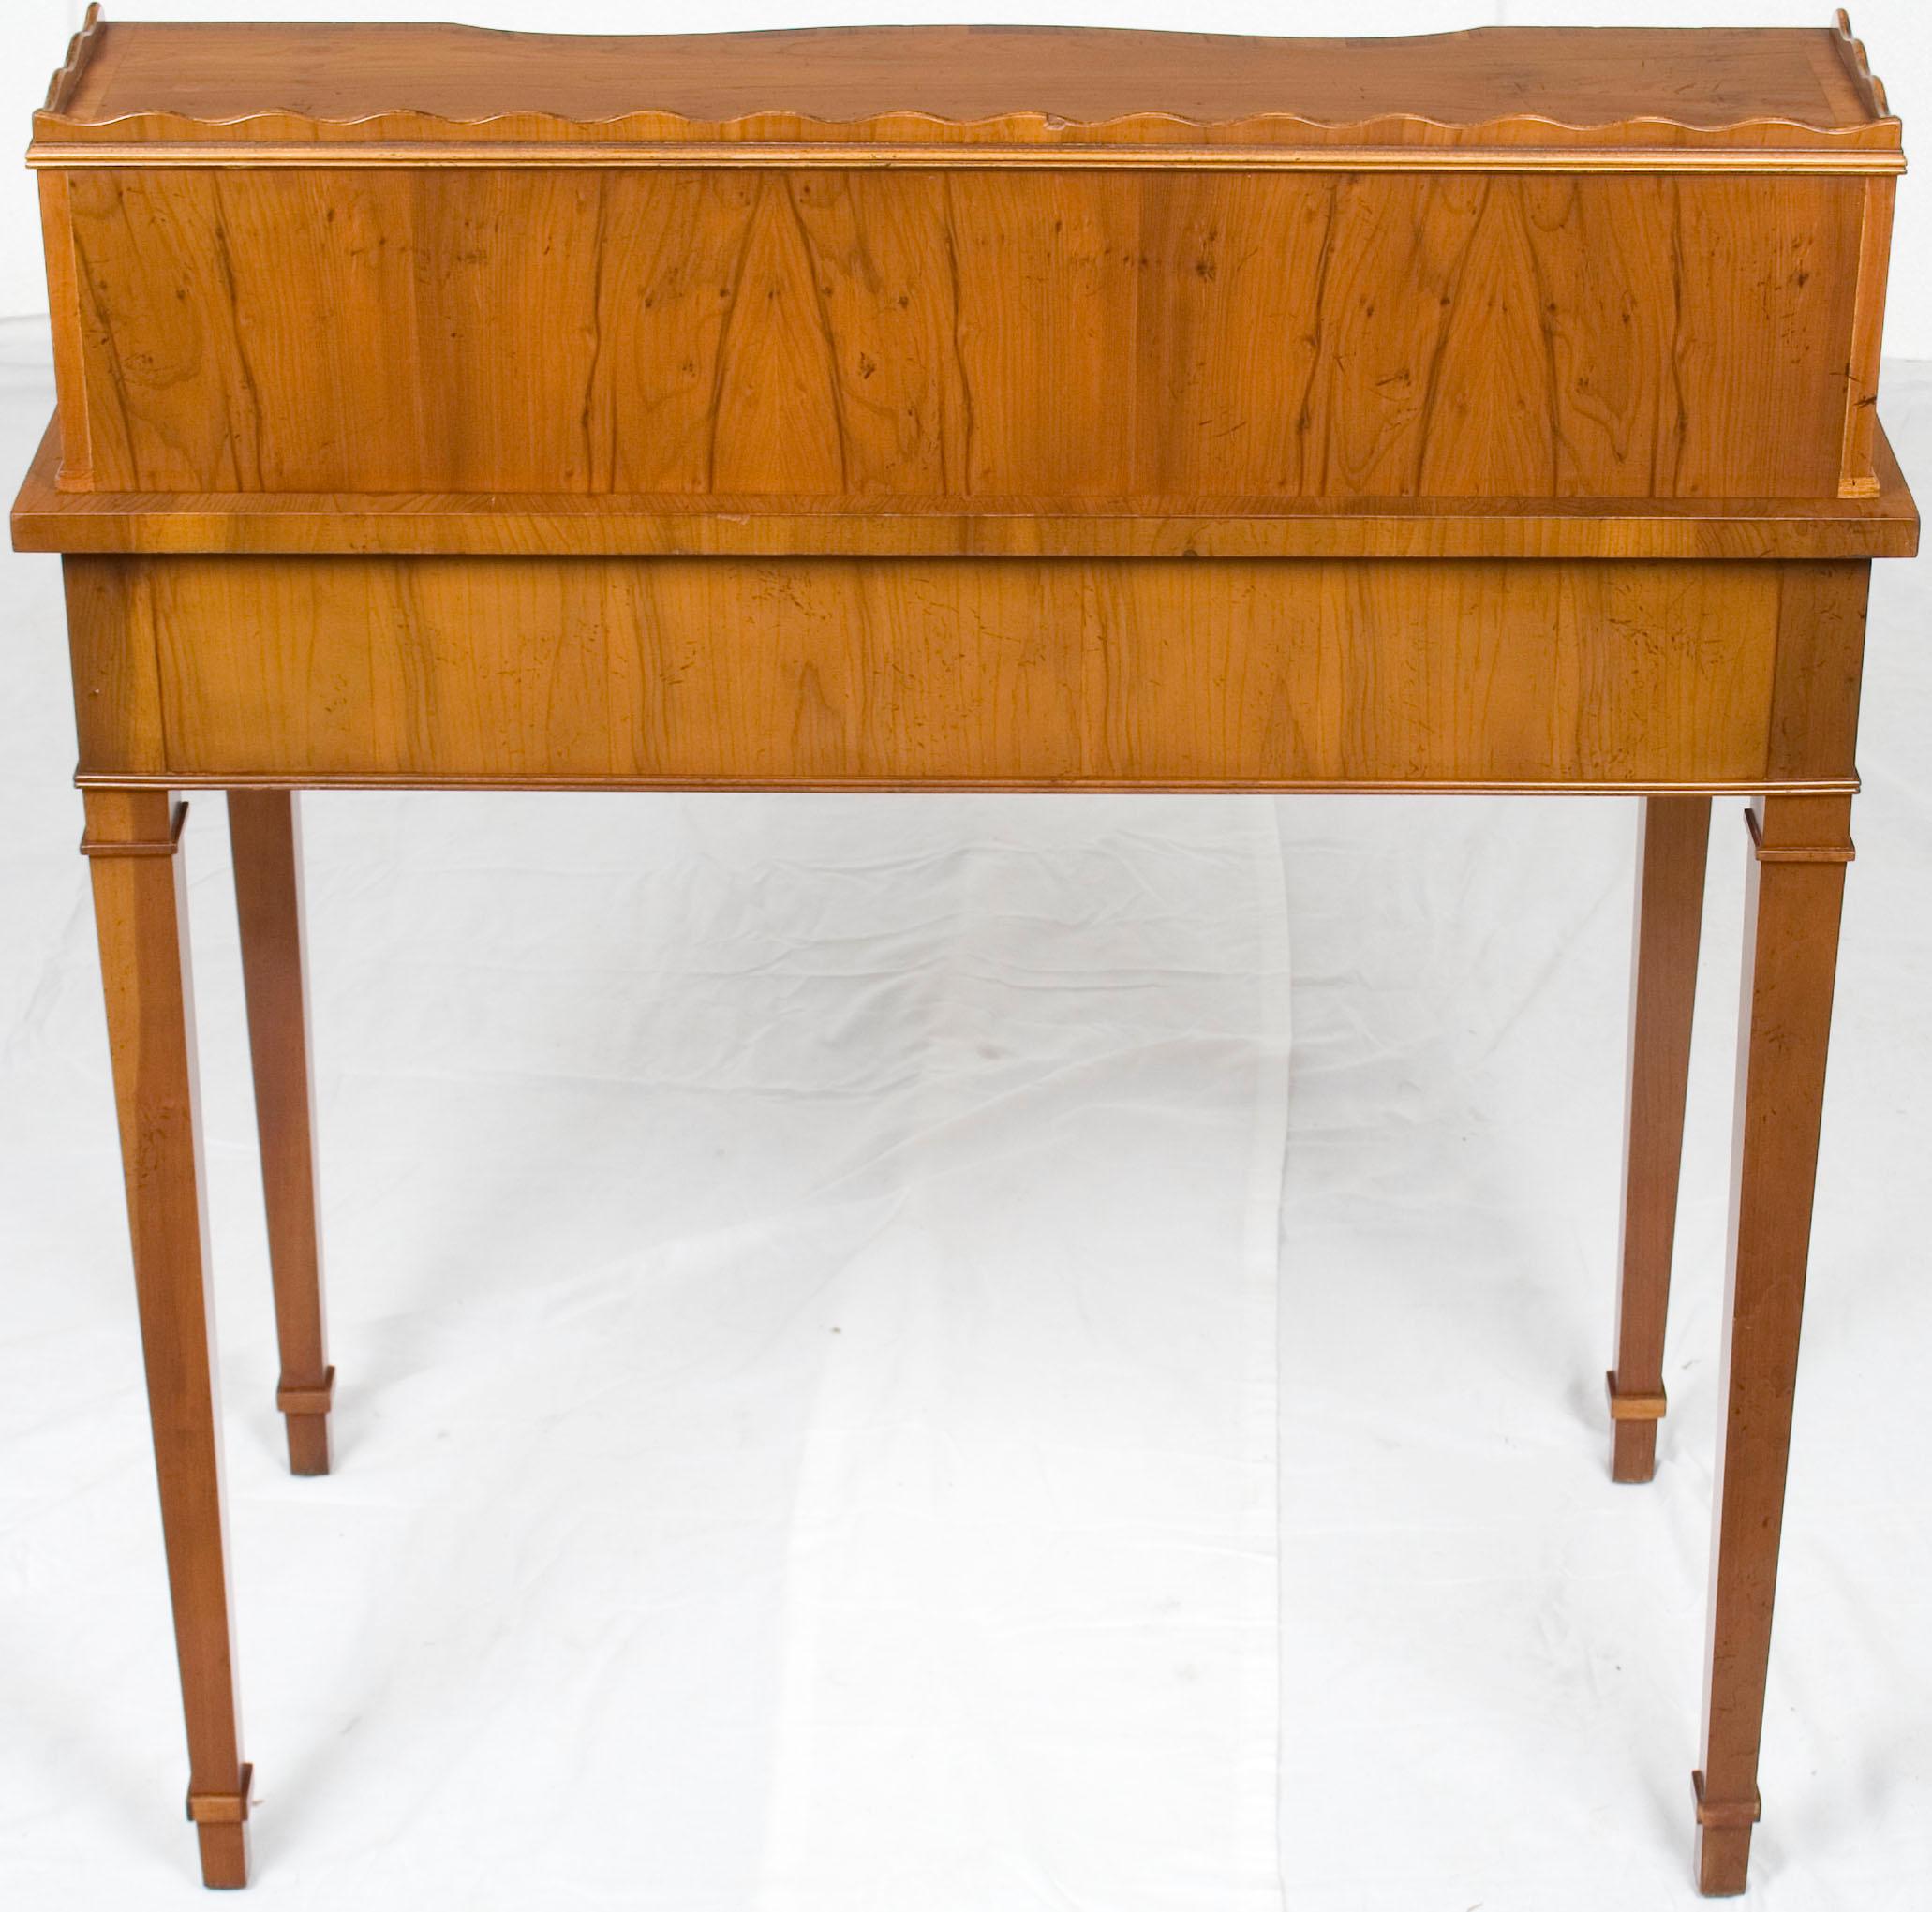 Small Yew Wood Leather Top Regency Style Writing Table Desk with Drawers 4